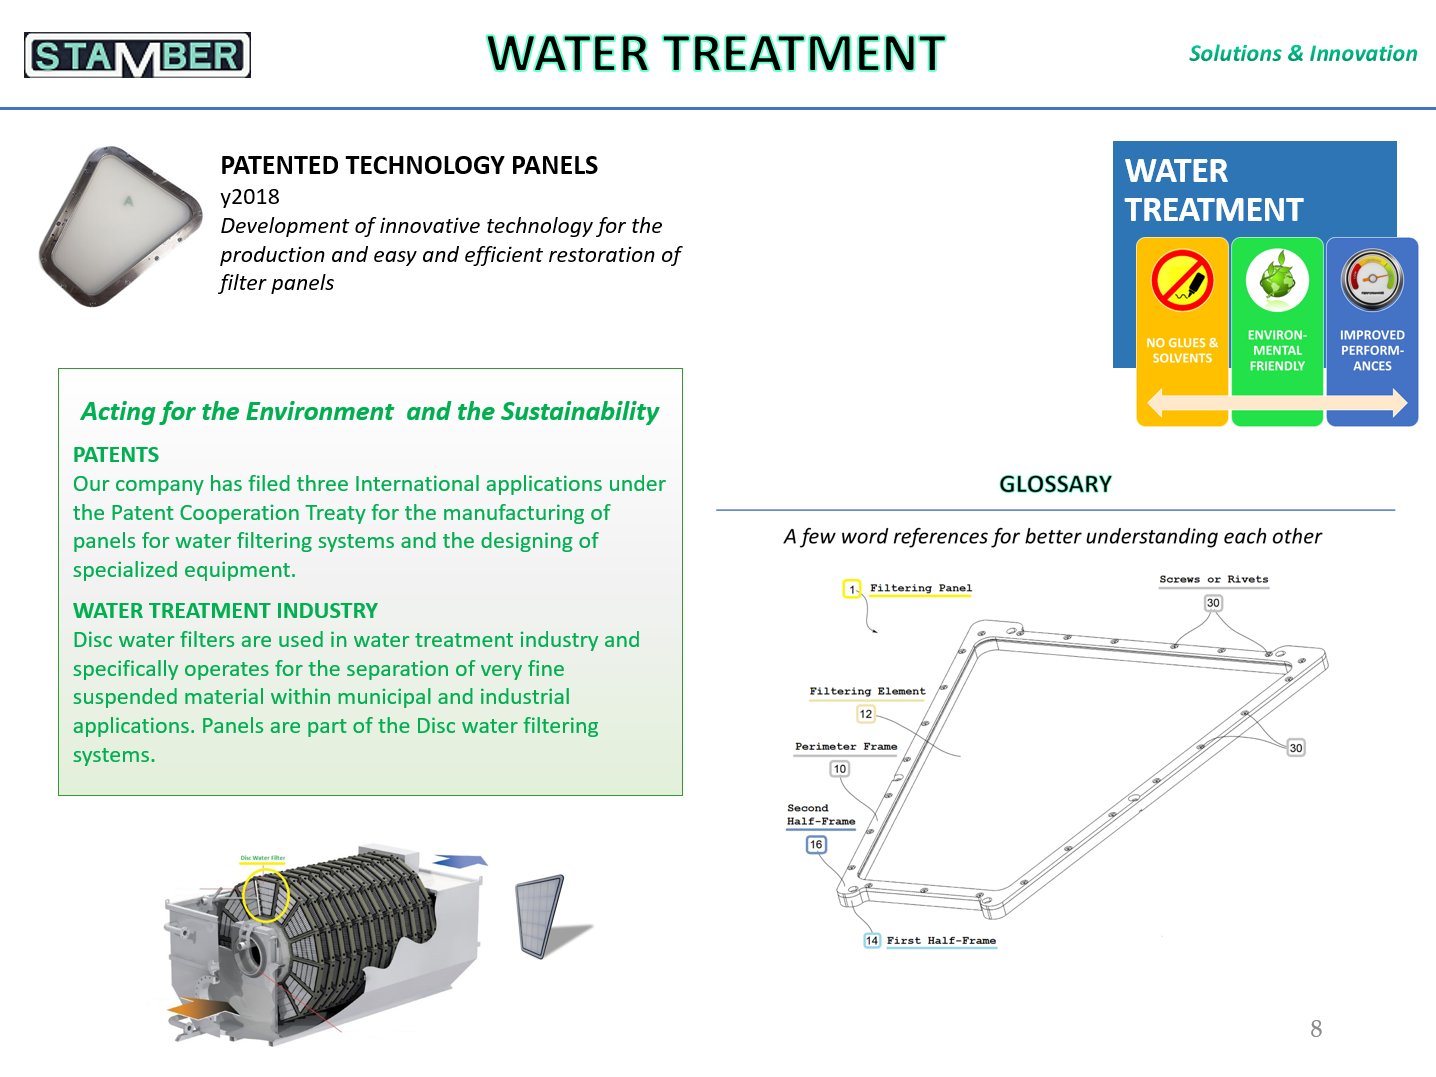 Ppp_STA-Consulting_Engineering-221111WaterTreatment-Slide.png